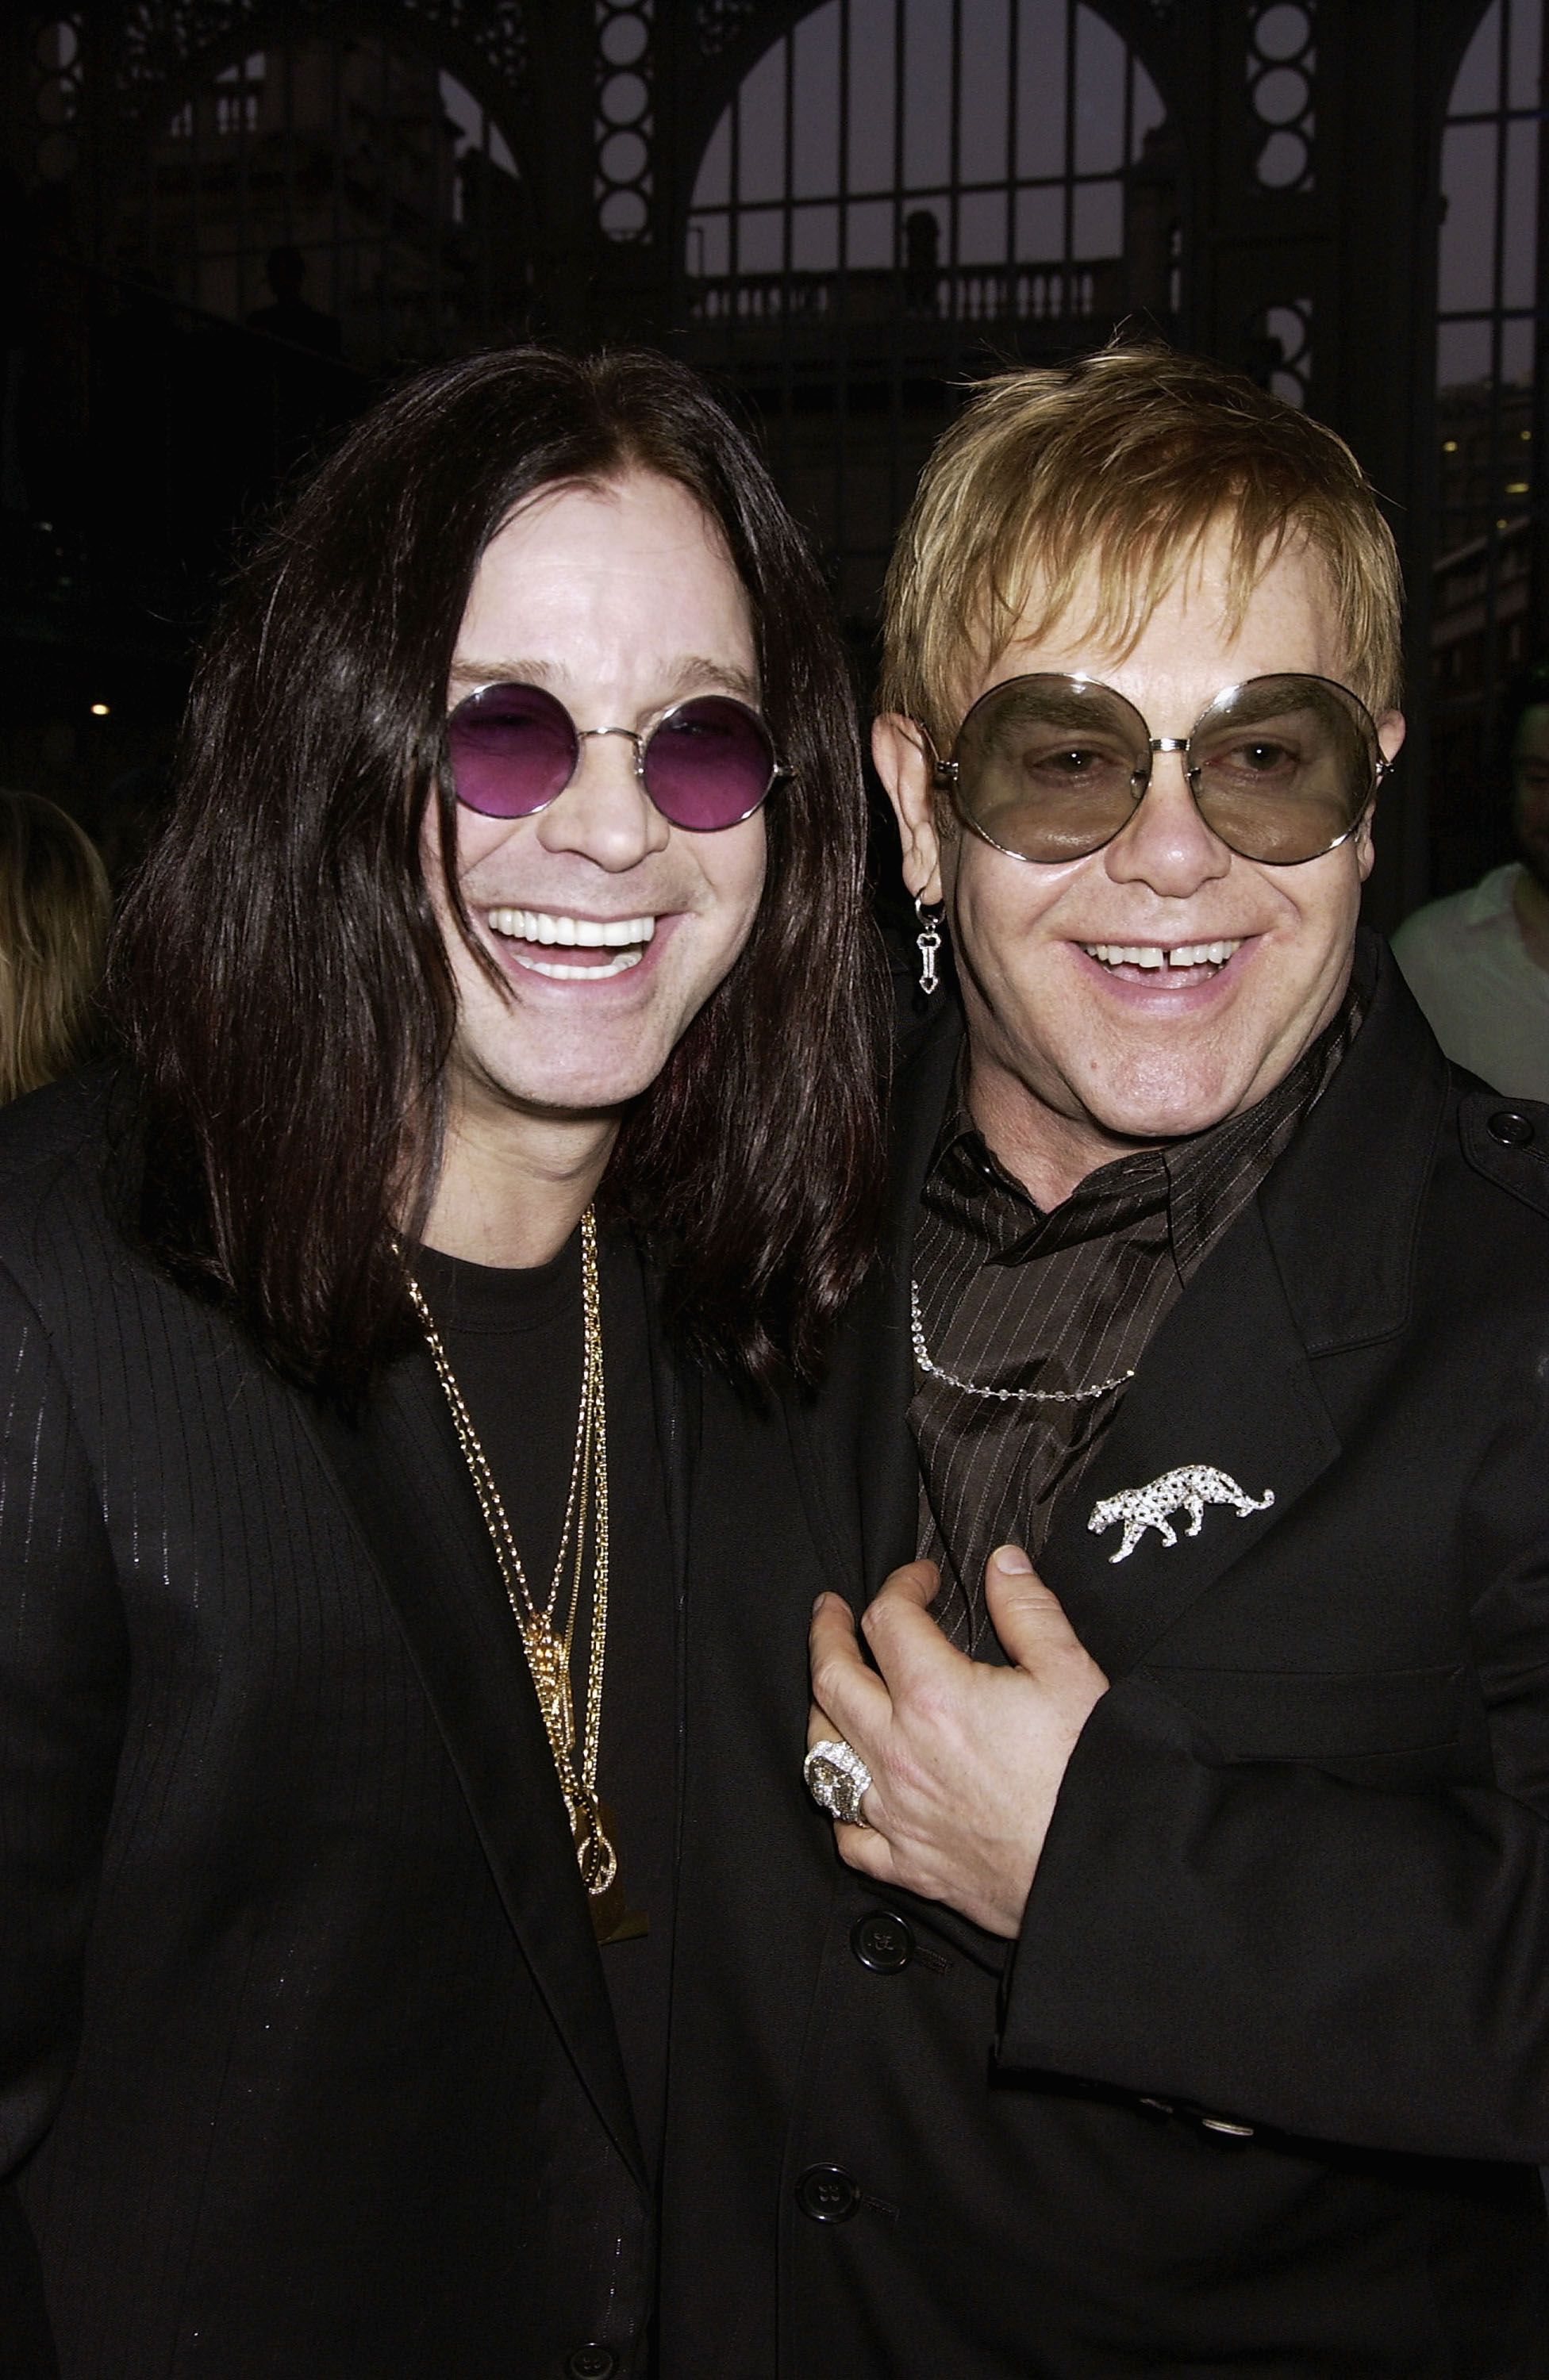 Ozzy Osbourne and Elton John at the  "GQ Men Of The Year Awards" afterparty on September 7, 2004, in London. | Source: Getty Images